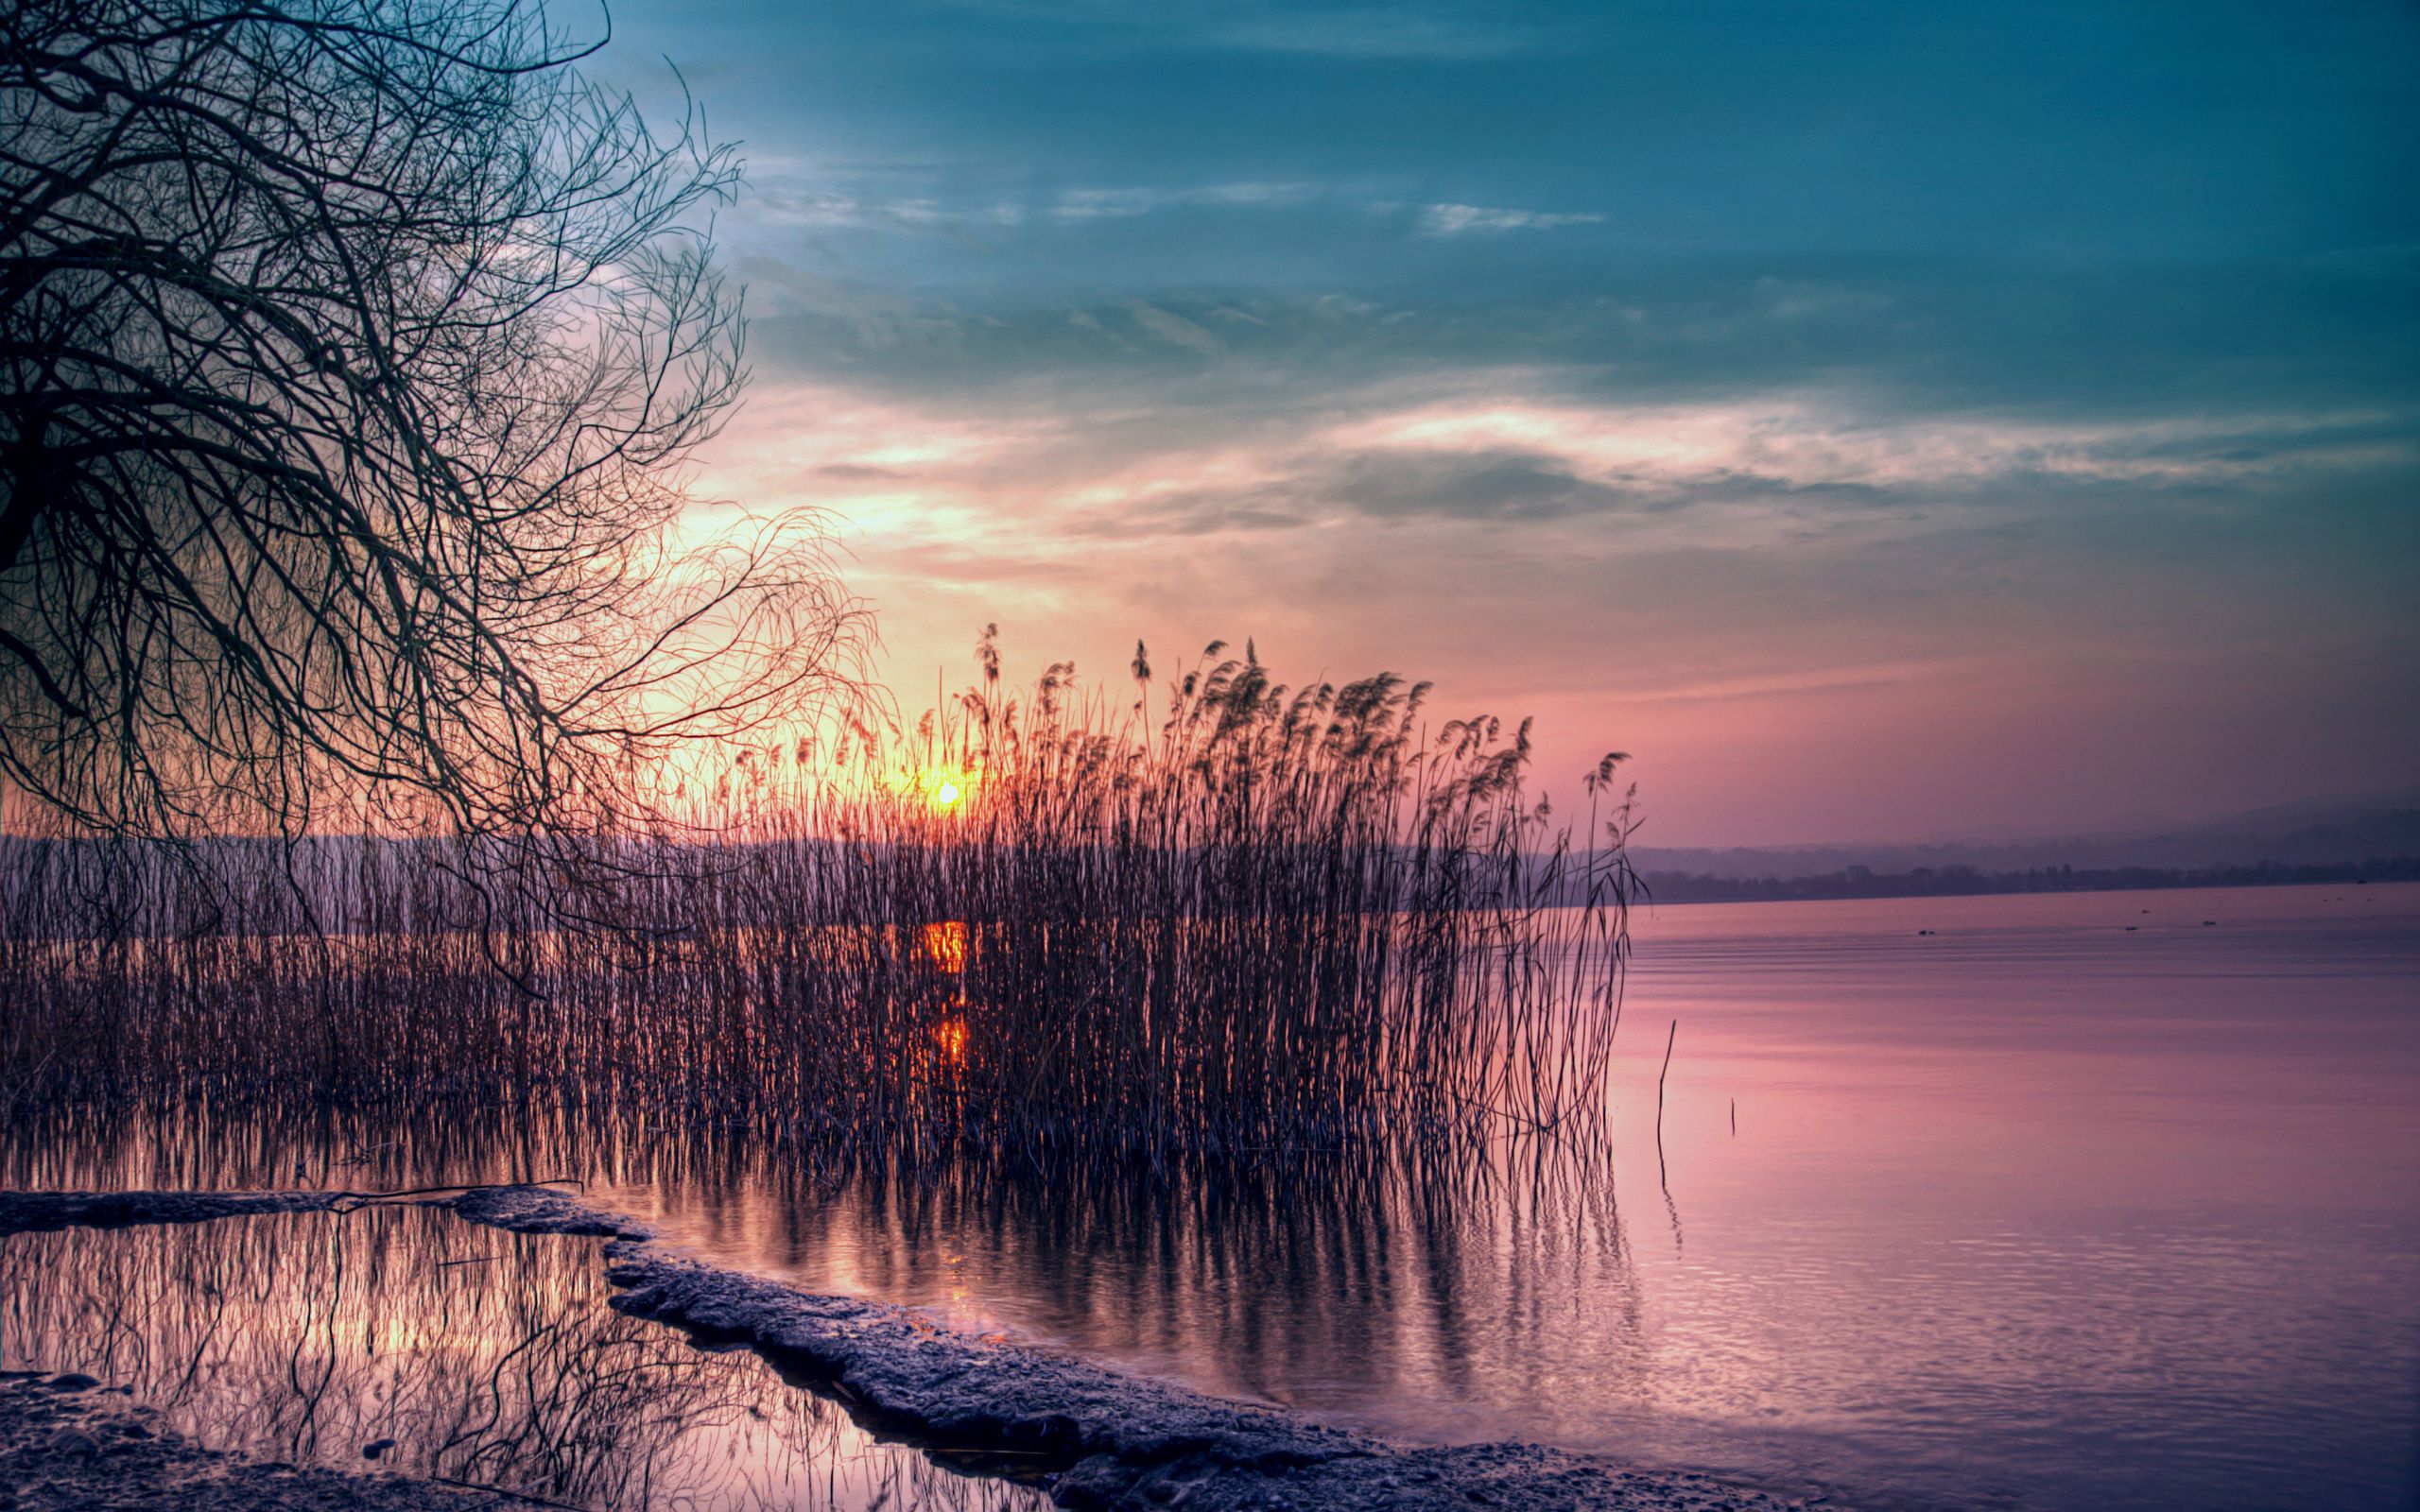 shore, bank, nature, water, sunset, wood, tree, branches, branch, evening, basin, cane, reed, willow Full HD